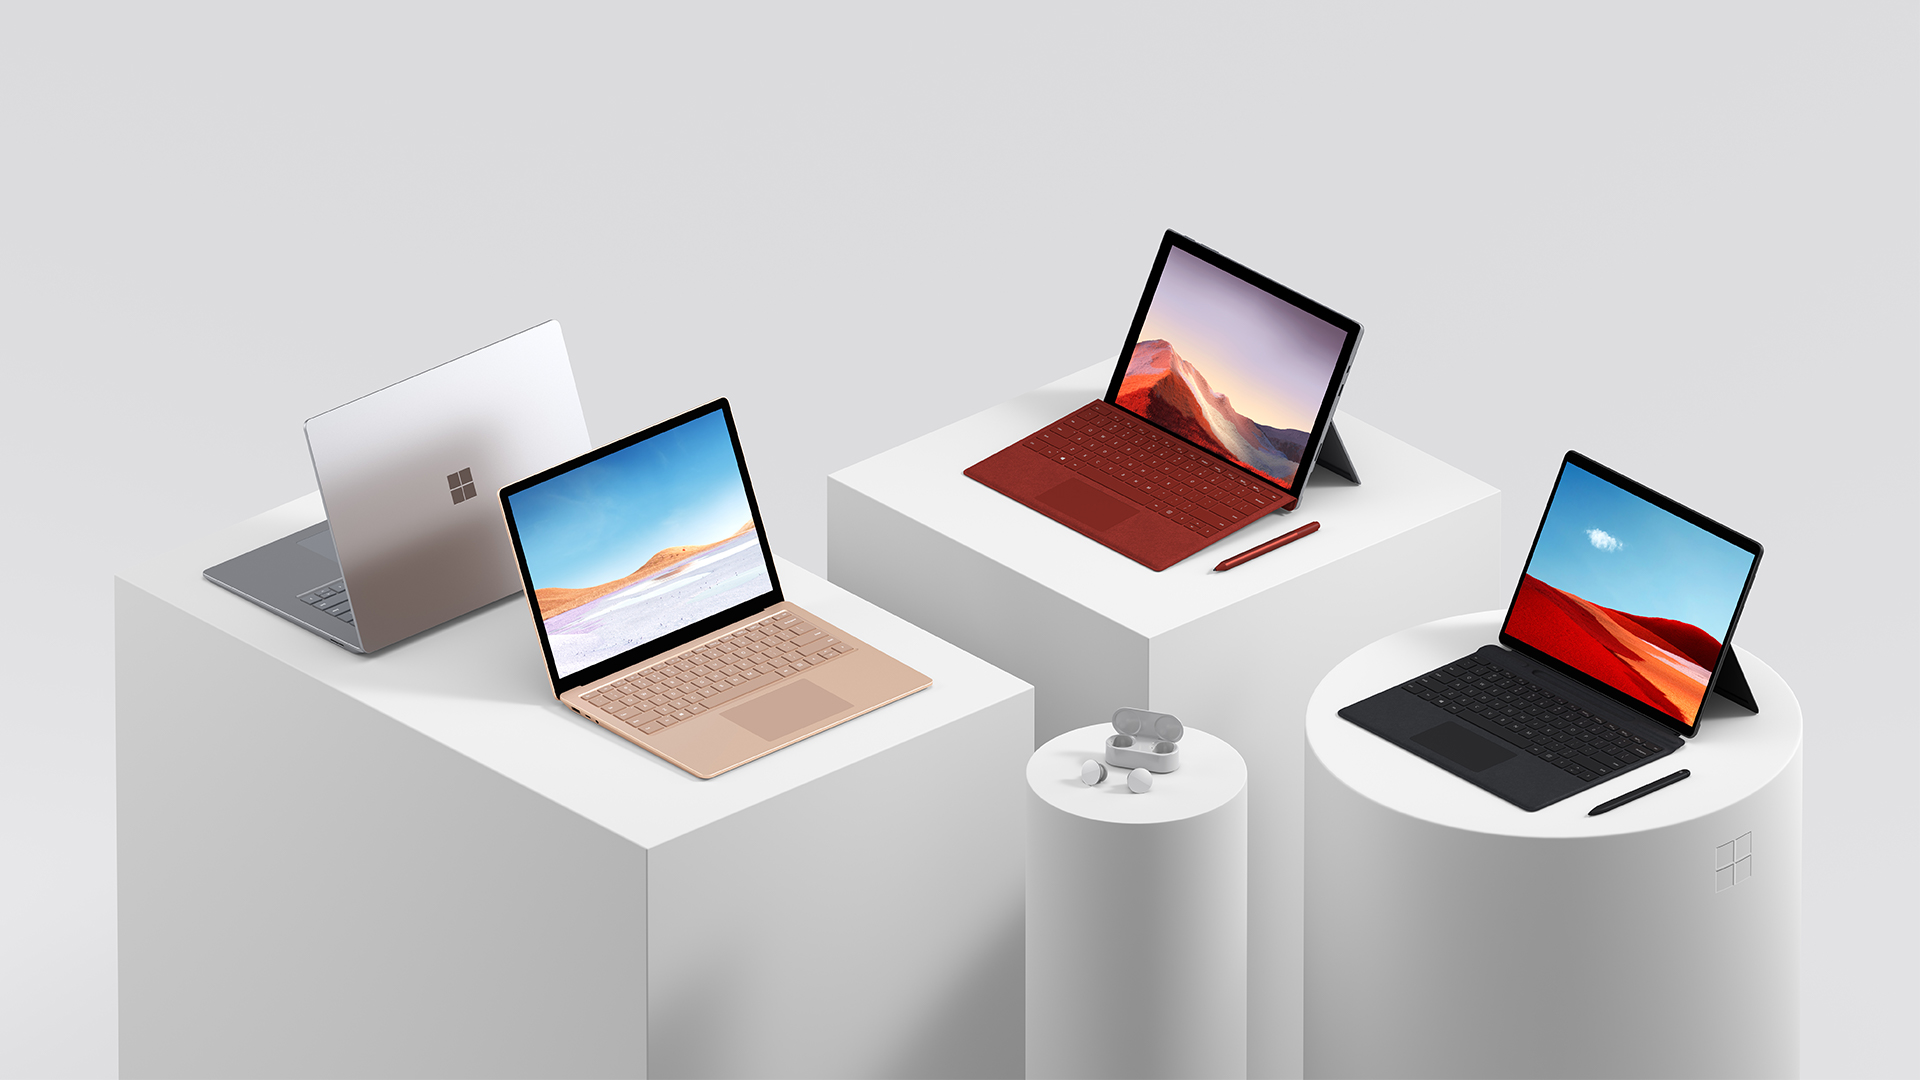 New Apple Products Coming Soon 2020 - HD Wallpaper 